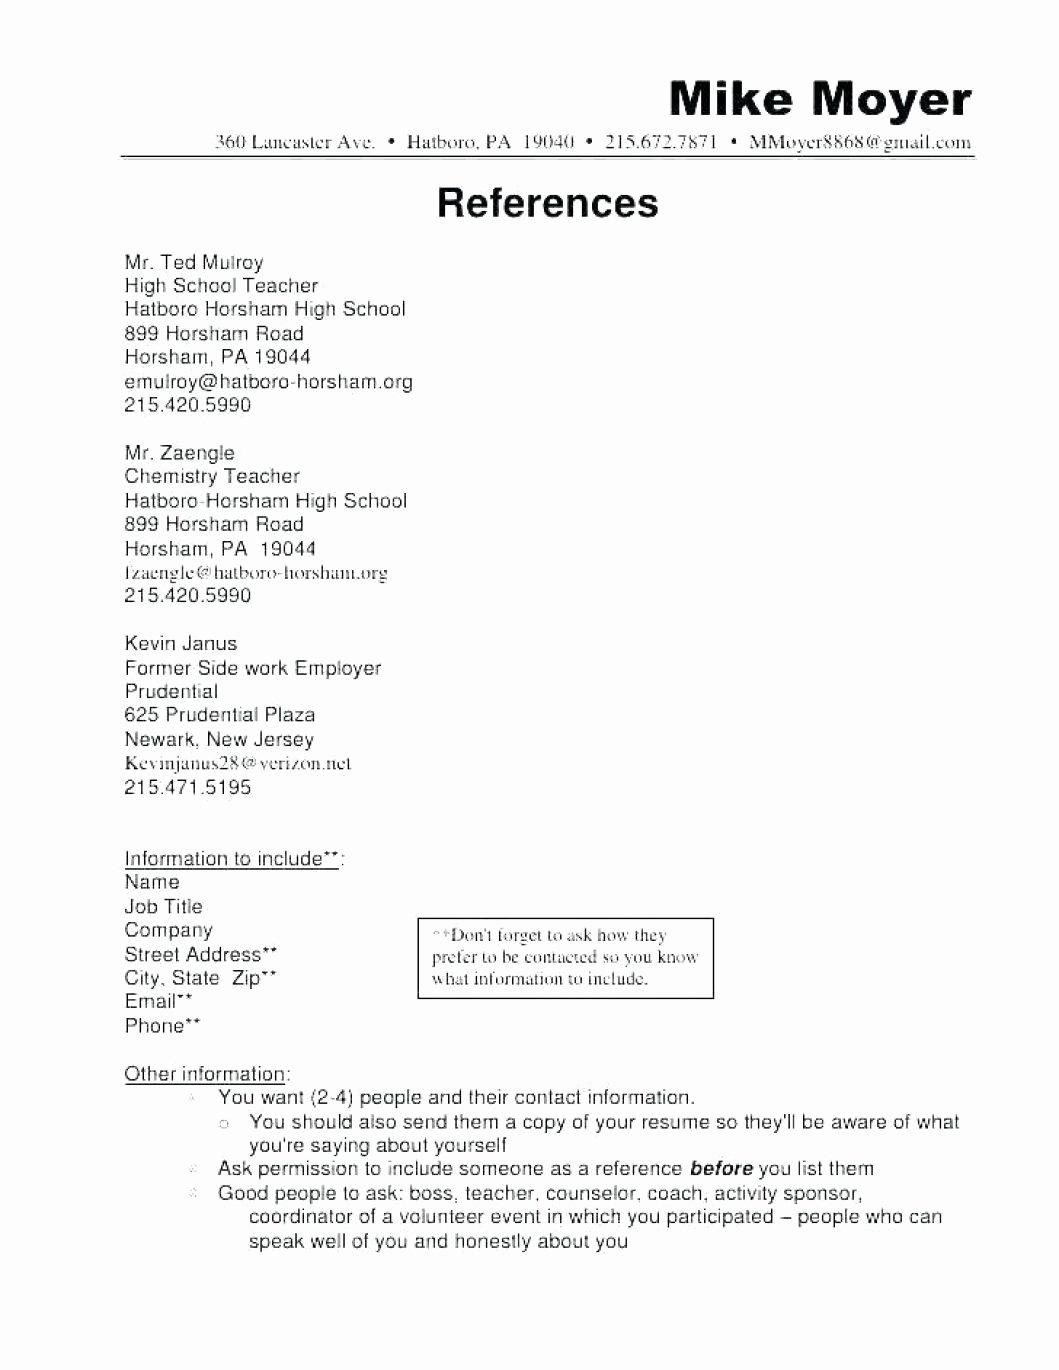 Resume Reference Sheet Example Beautiful 10 References Relationship to You Examples